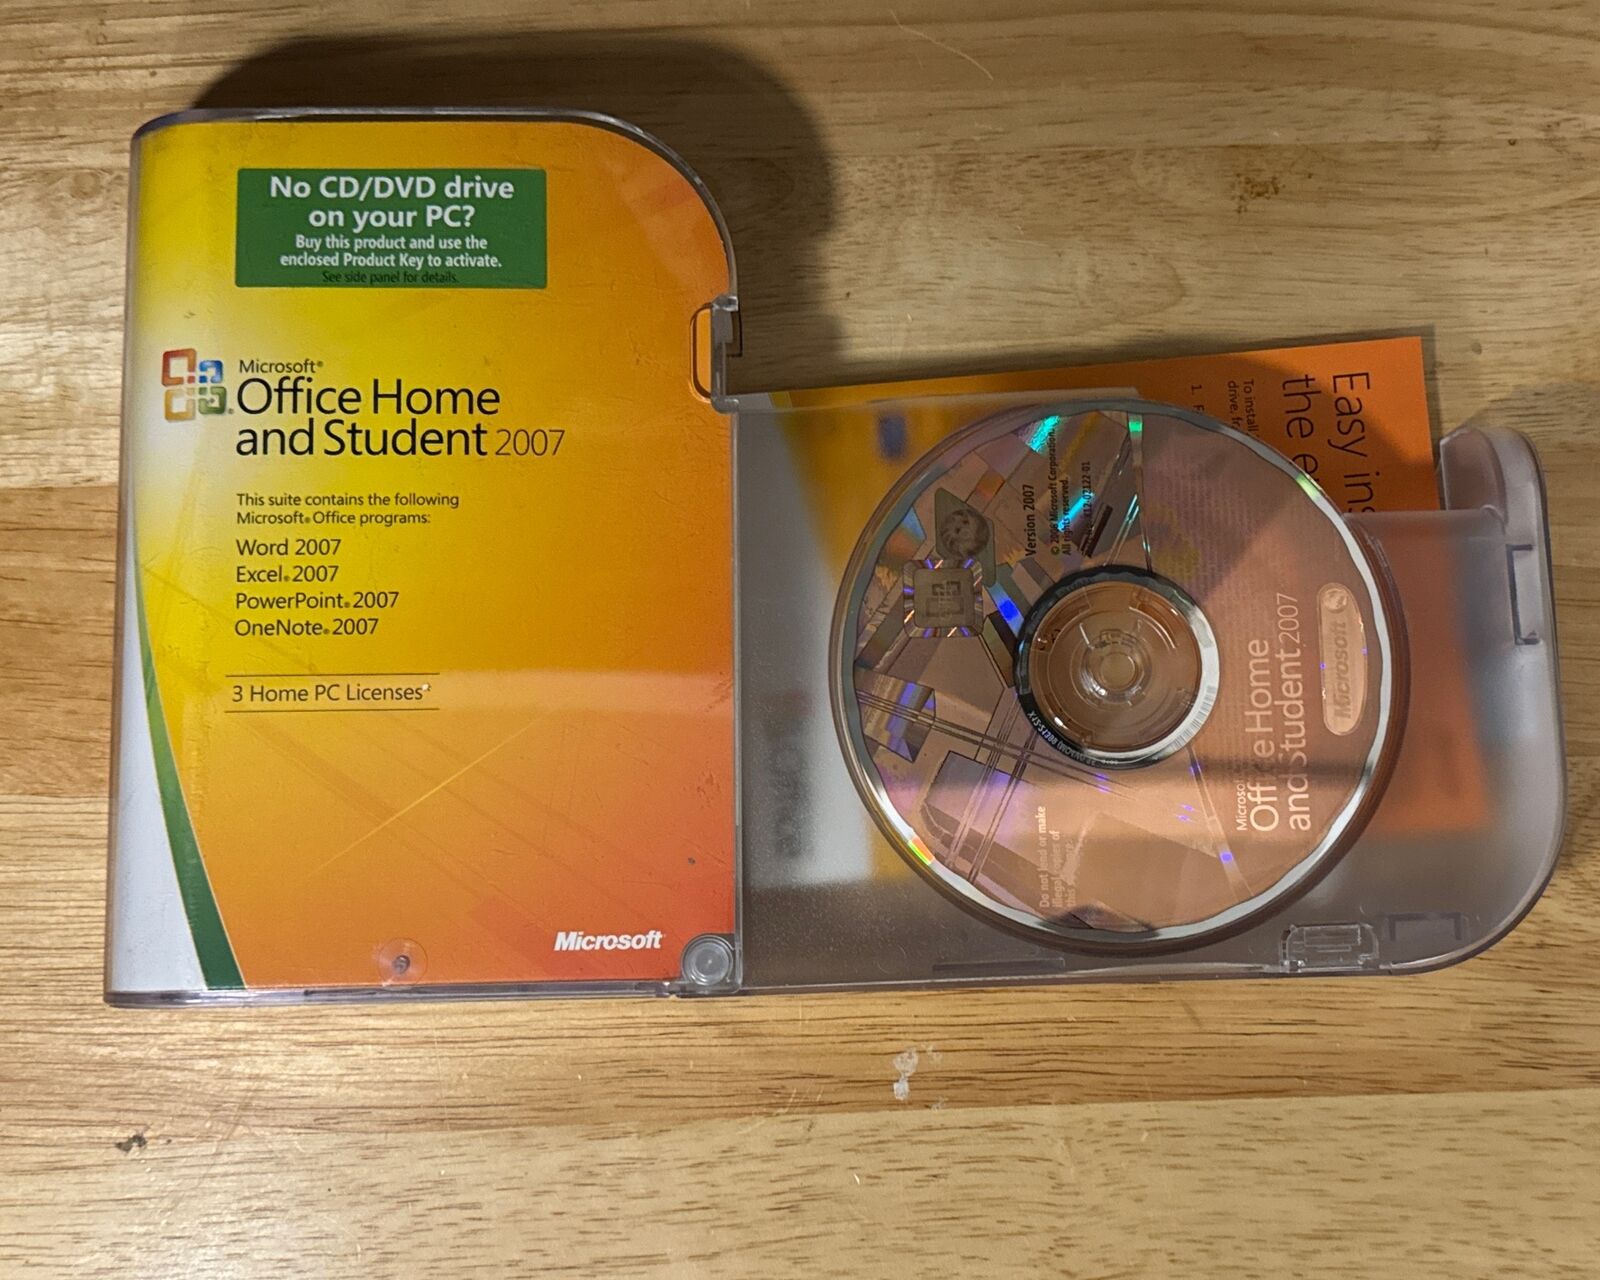 Microsoft Office Home And Student 2007 With CD Product Key for 3 PC